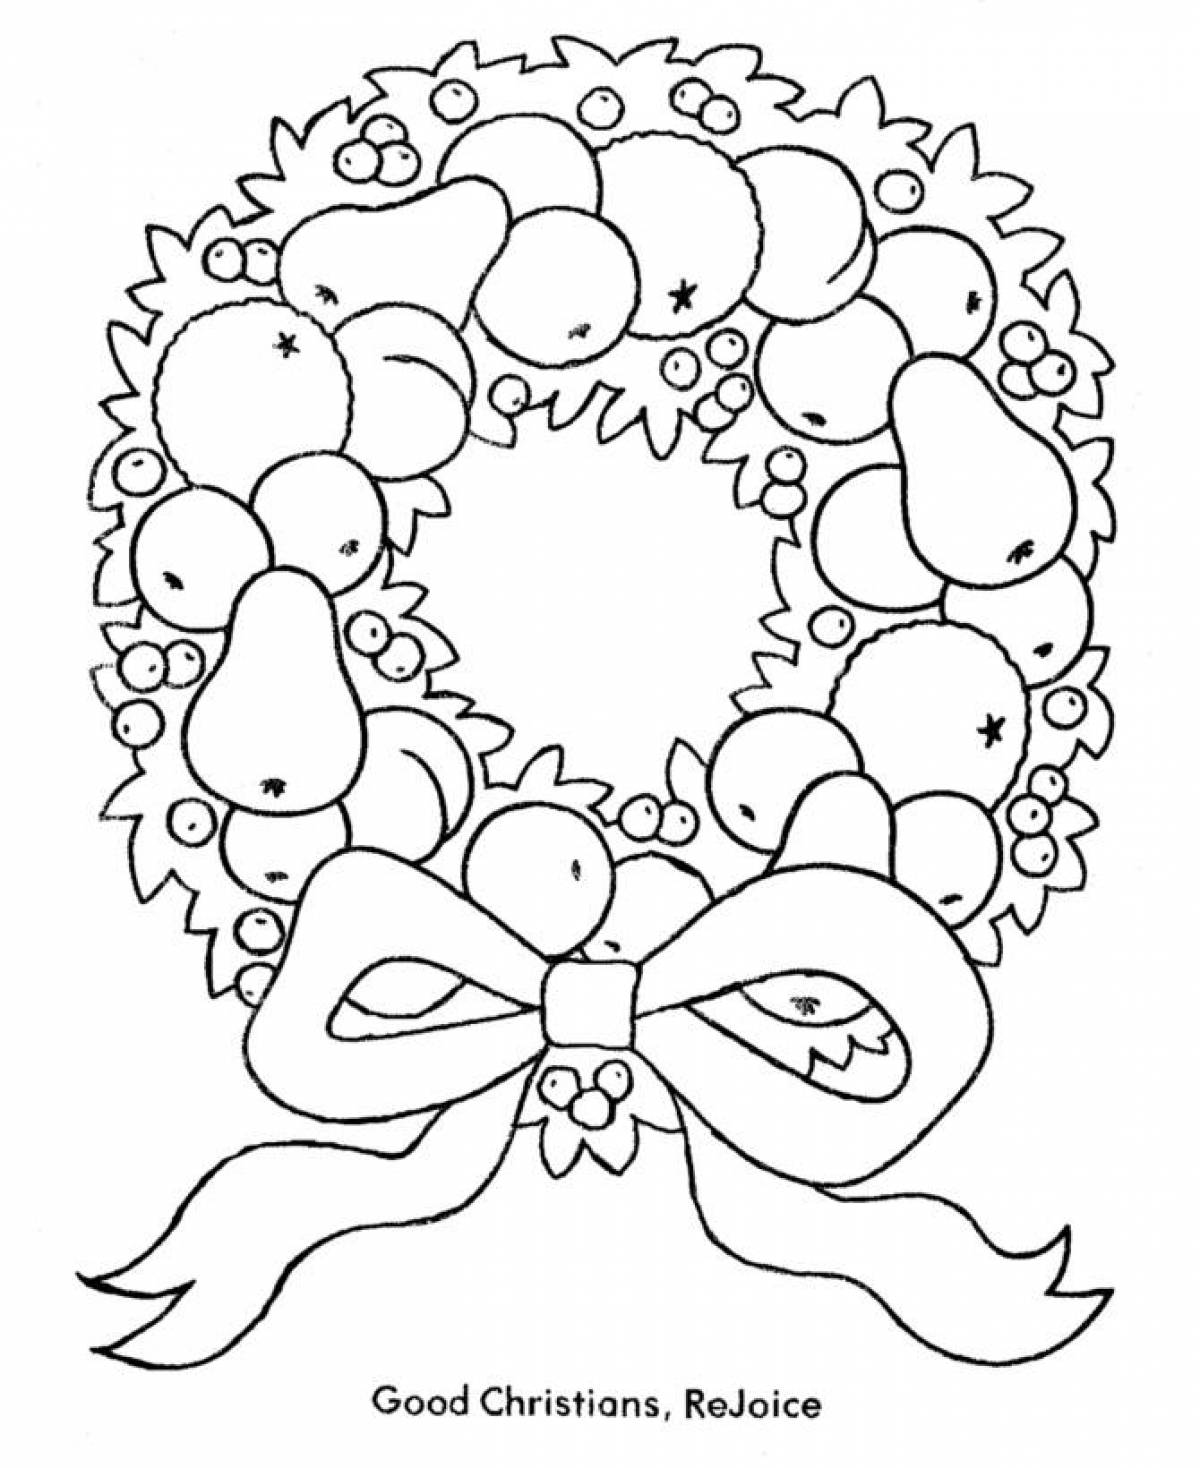 Coloring animated Christmas wreath